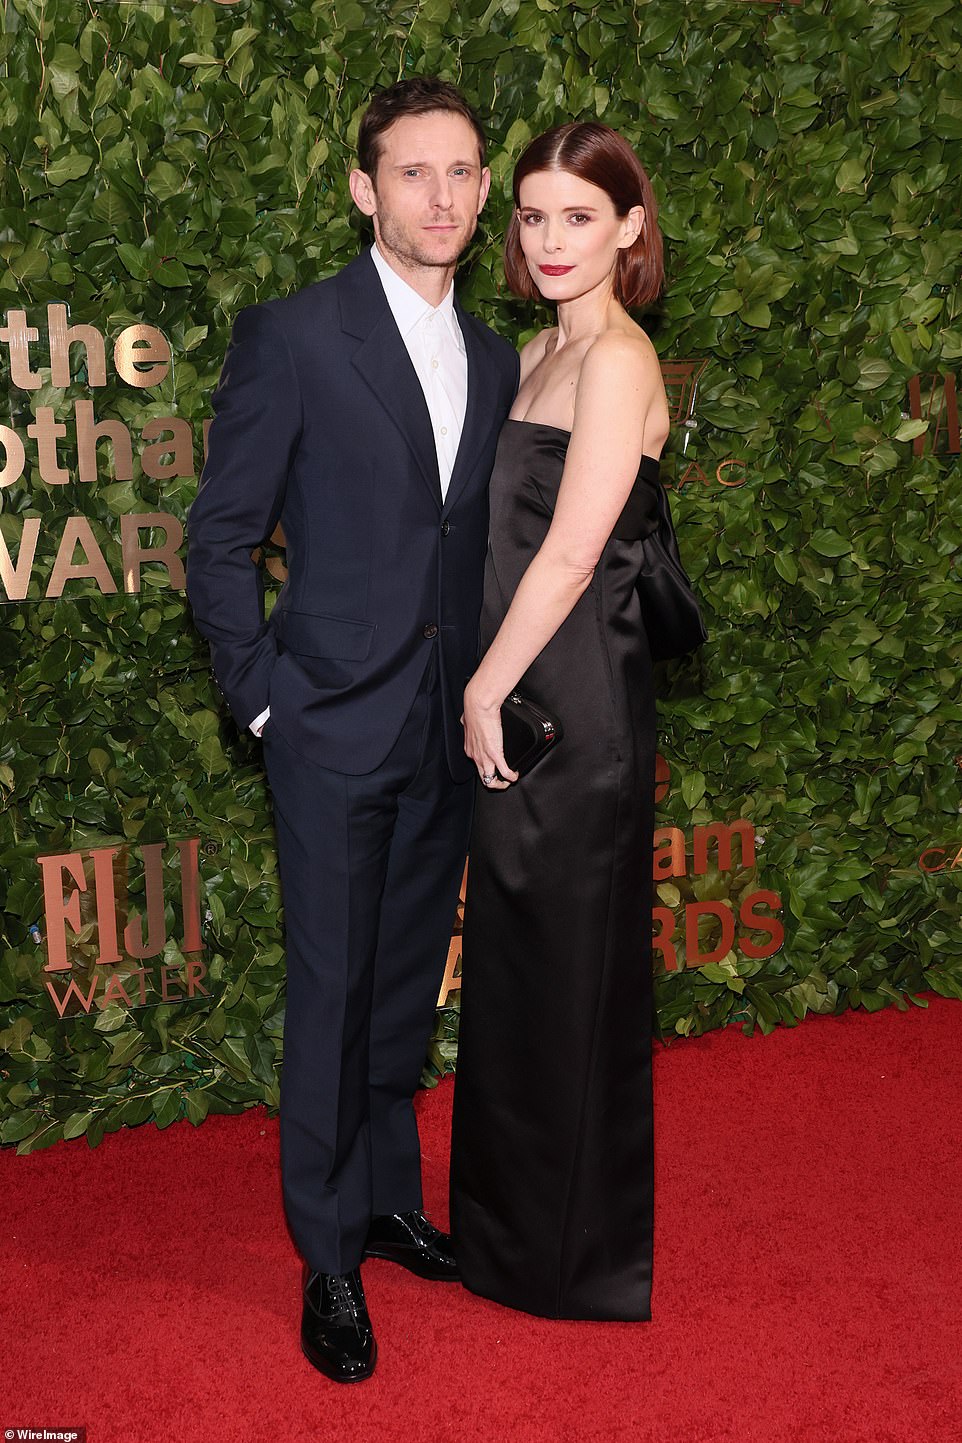 Perfect pair: Her plus one was her husband, Jamie Bell, who was previously married to actress Evan Rachel Wood